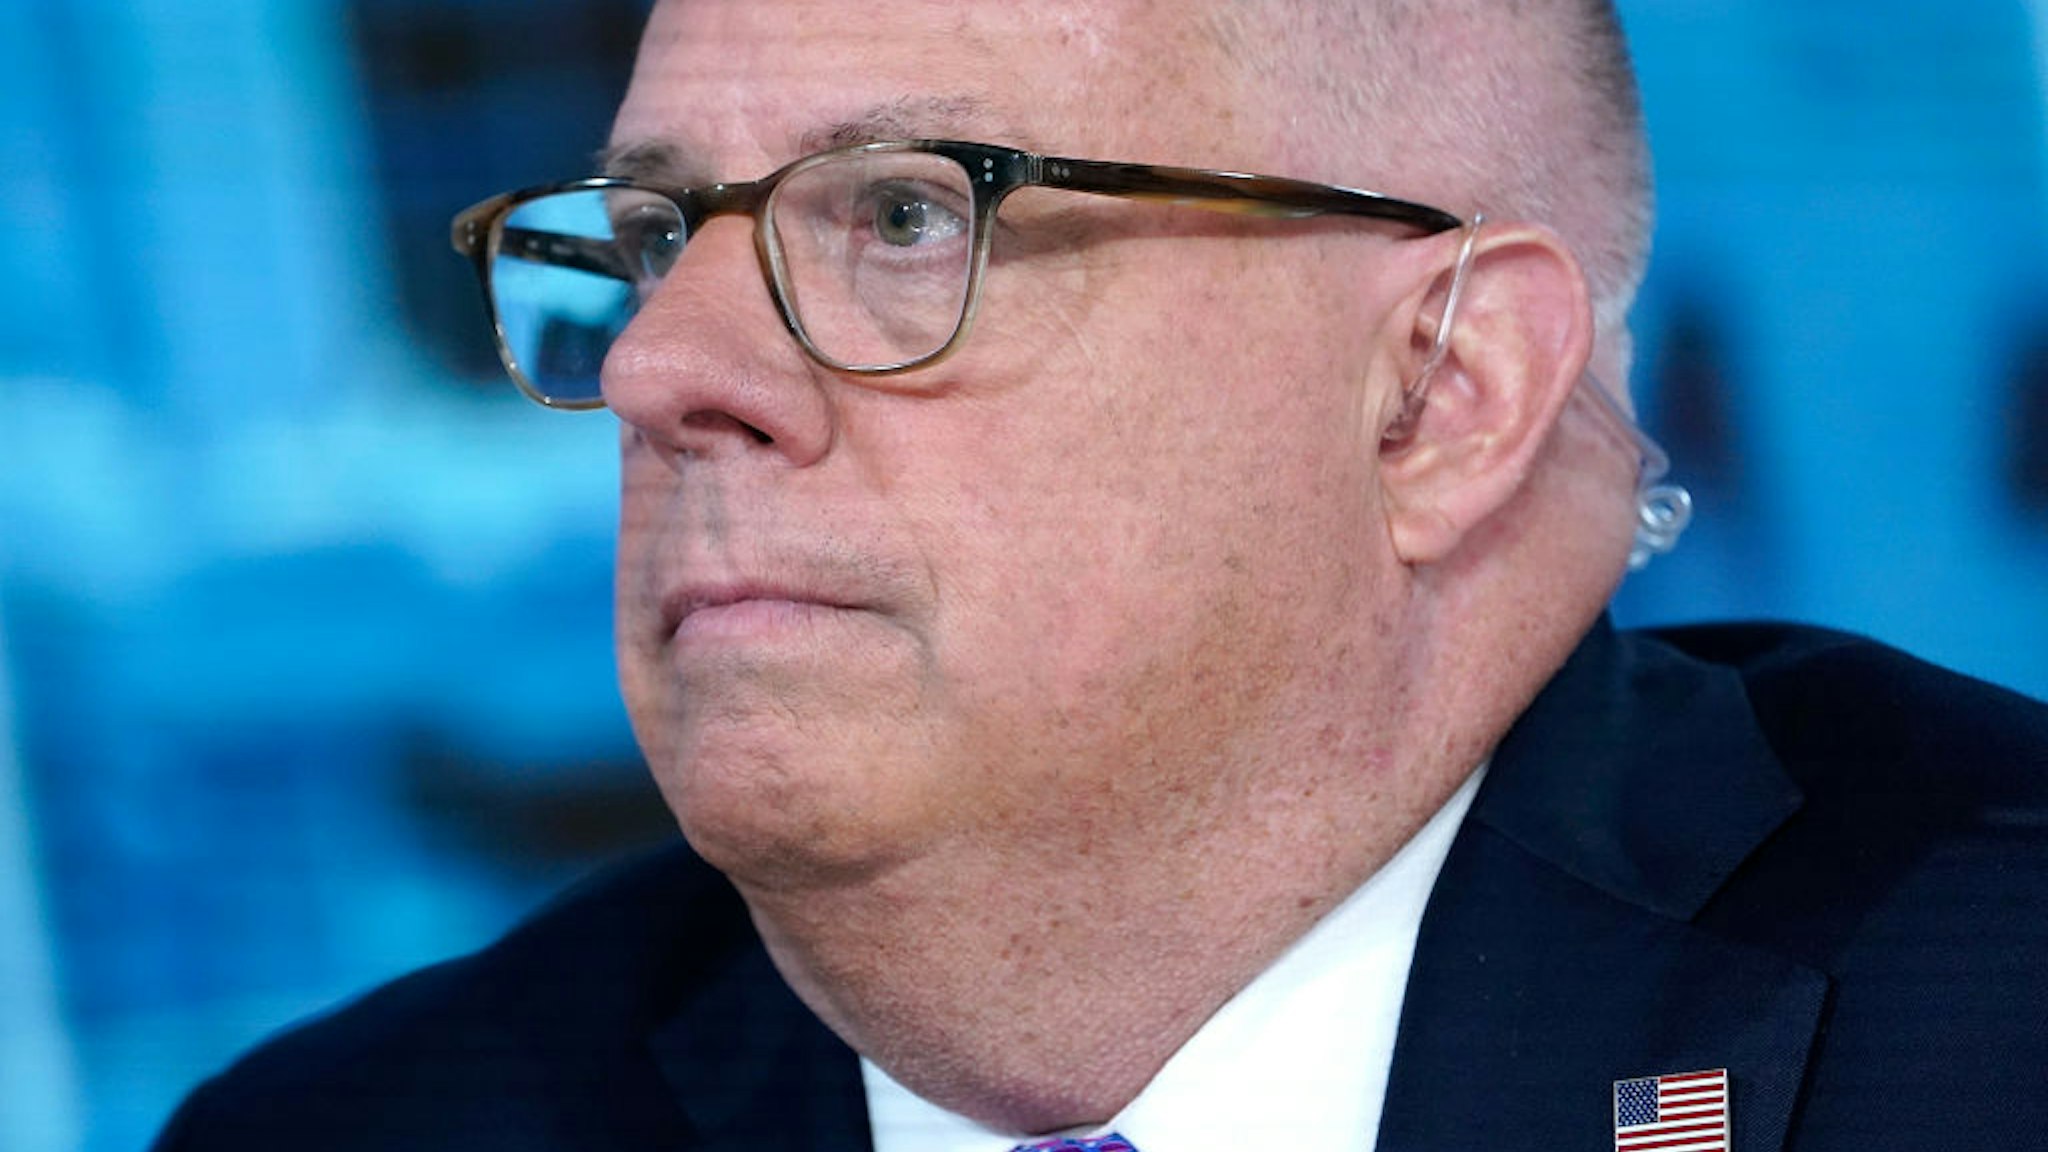 Maryland Governor Larry Hogan is interviewed by Fox News' Bill Hemmer at Fox News Studios on August 01, 2019 in New York City.